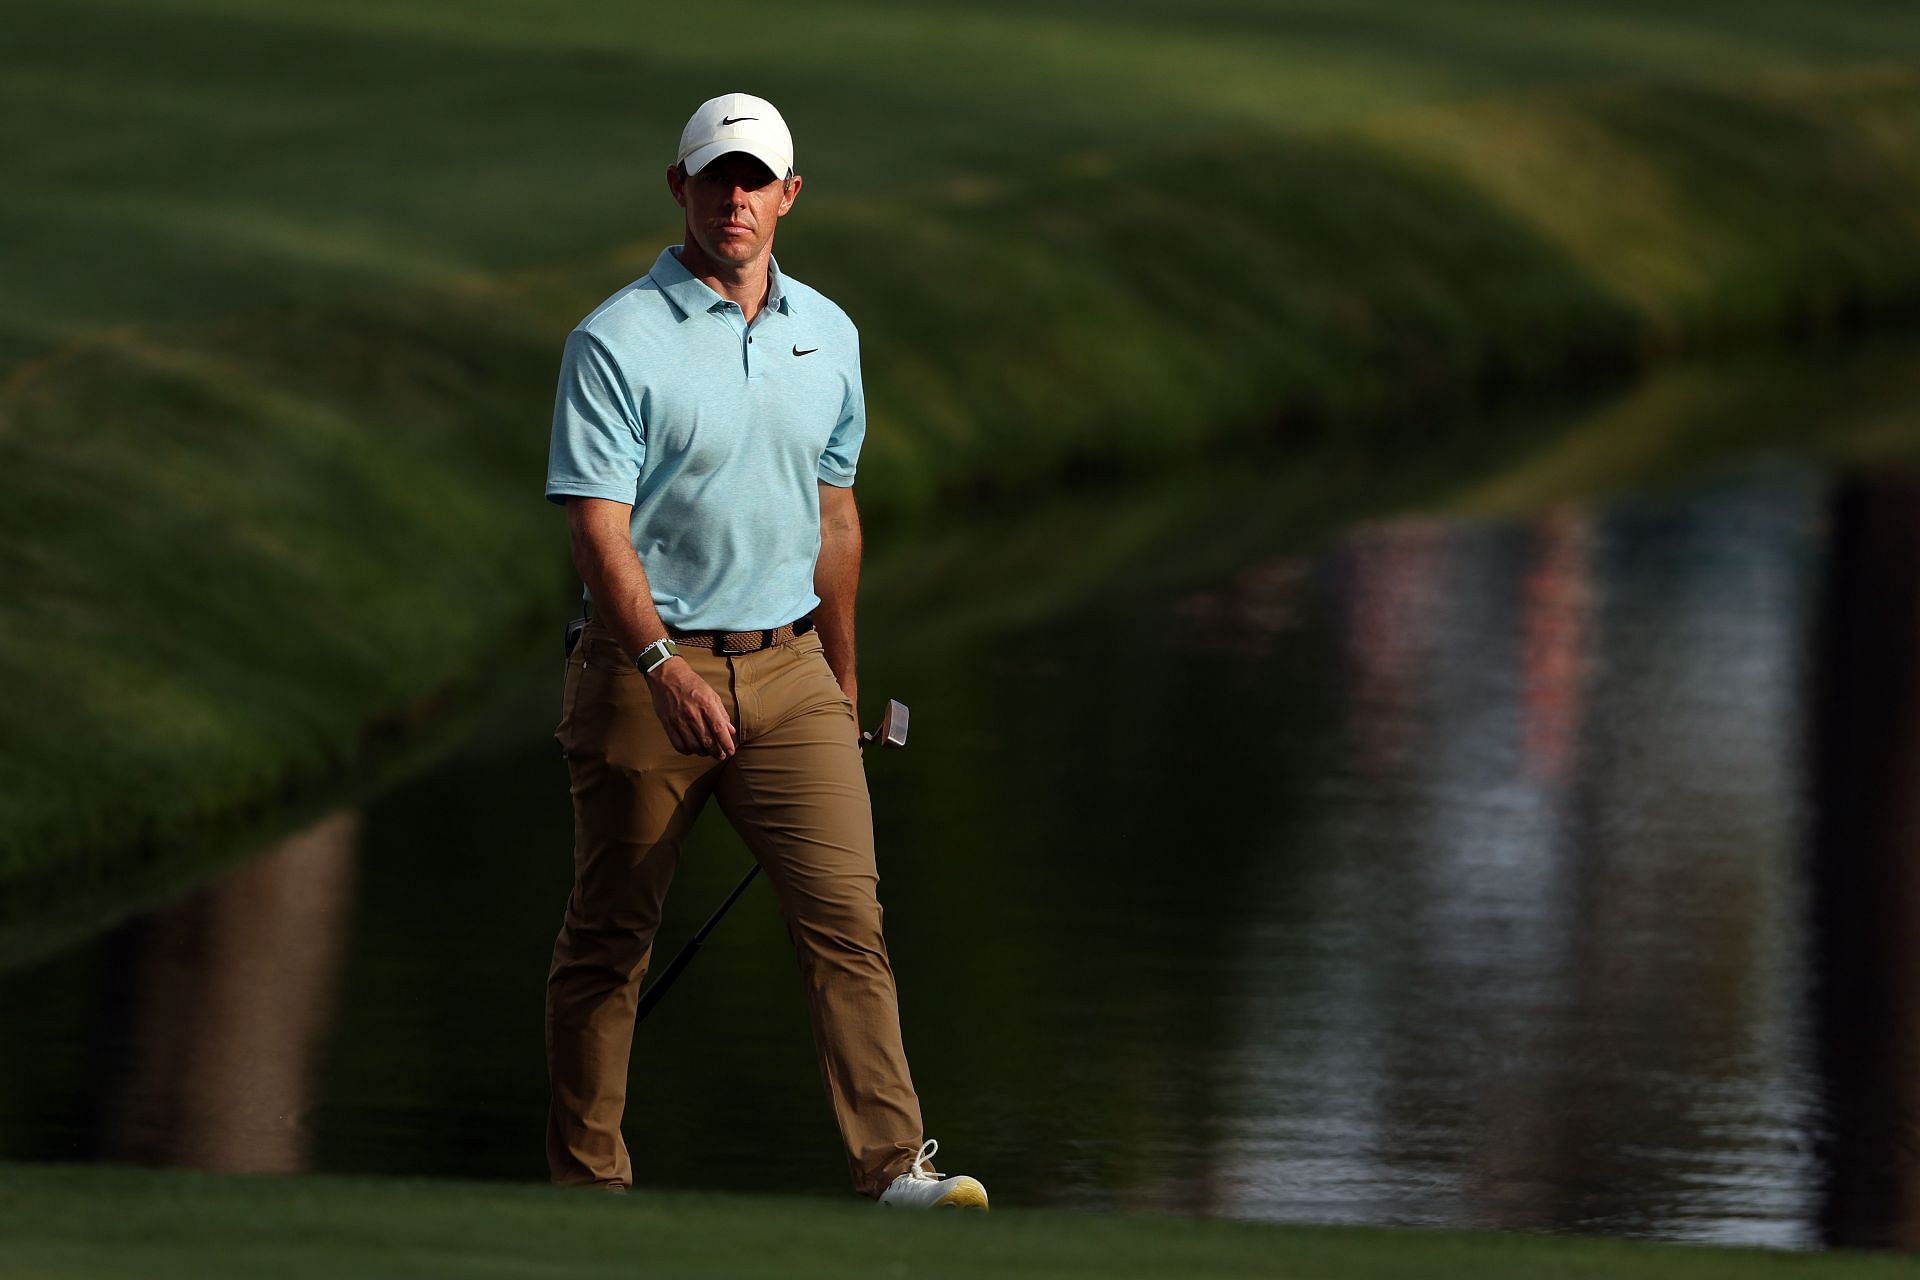 Rory McIlroy will tee up for the second round of the 2023 Masters at 10:12 a.m EST on Friday